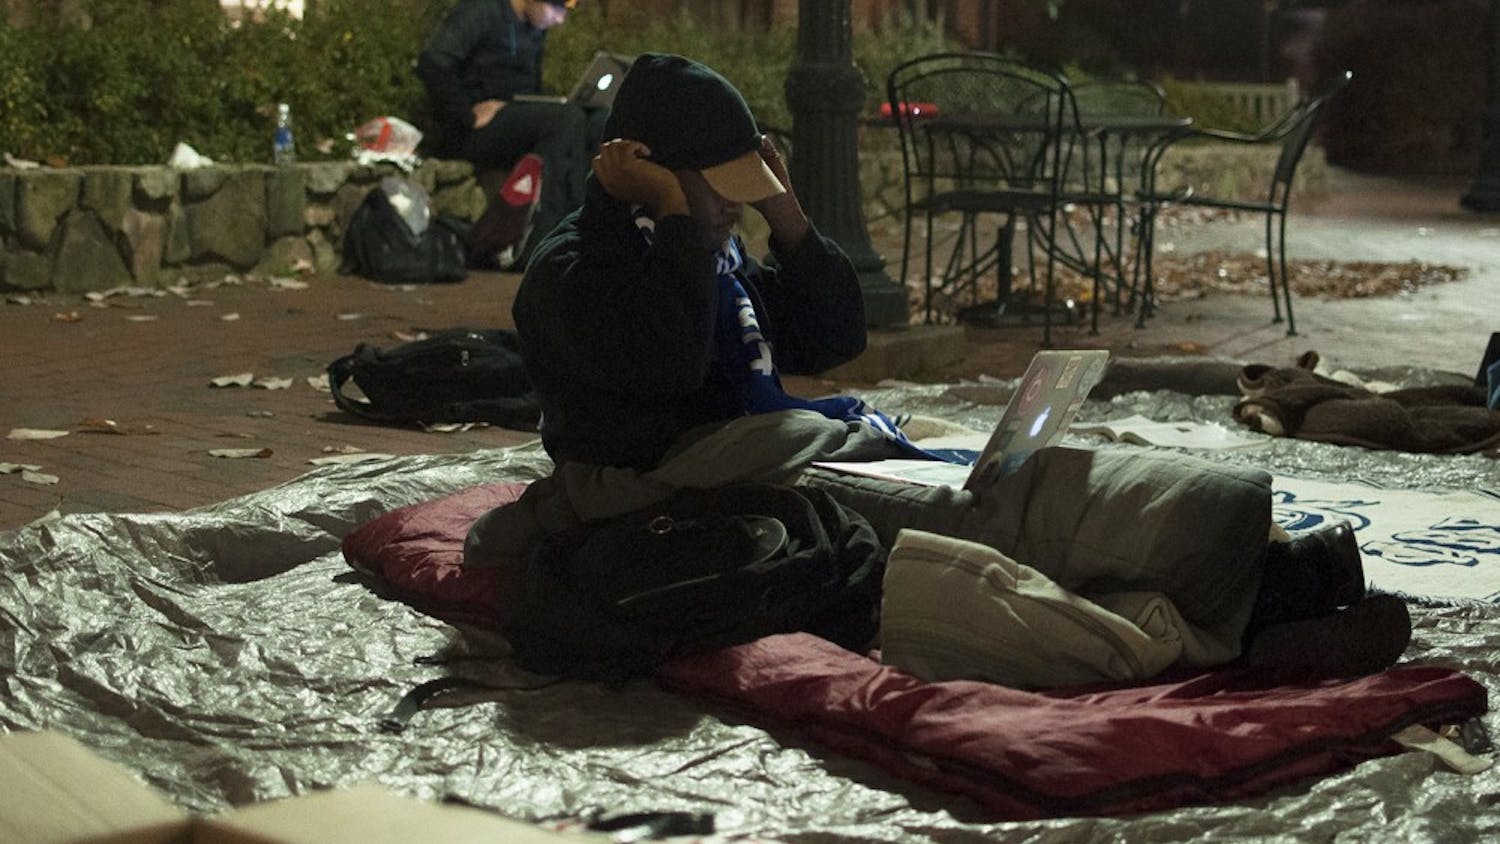 Frank Tillman, president of Phi Beta Sigma fraternity, sleep out for the homeless in the SASB Plaza taking donations for the homeless shelter on Franklin Street.